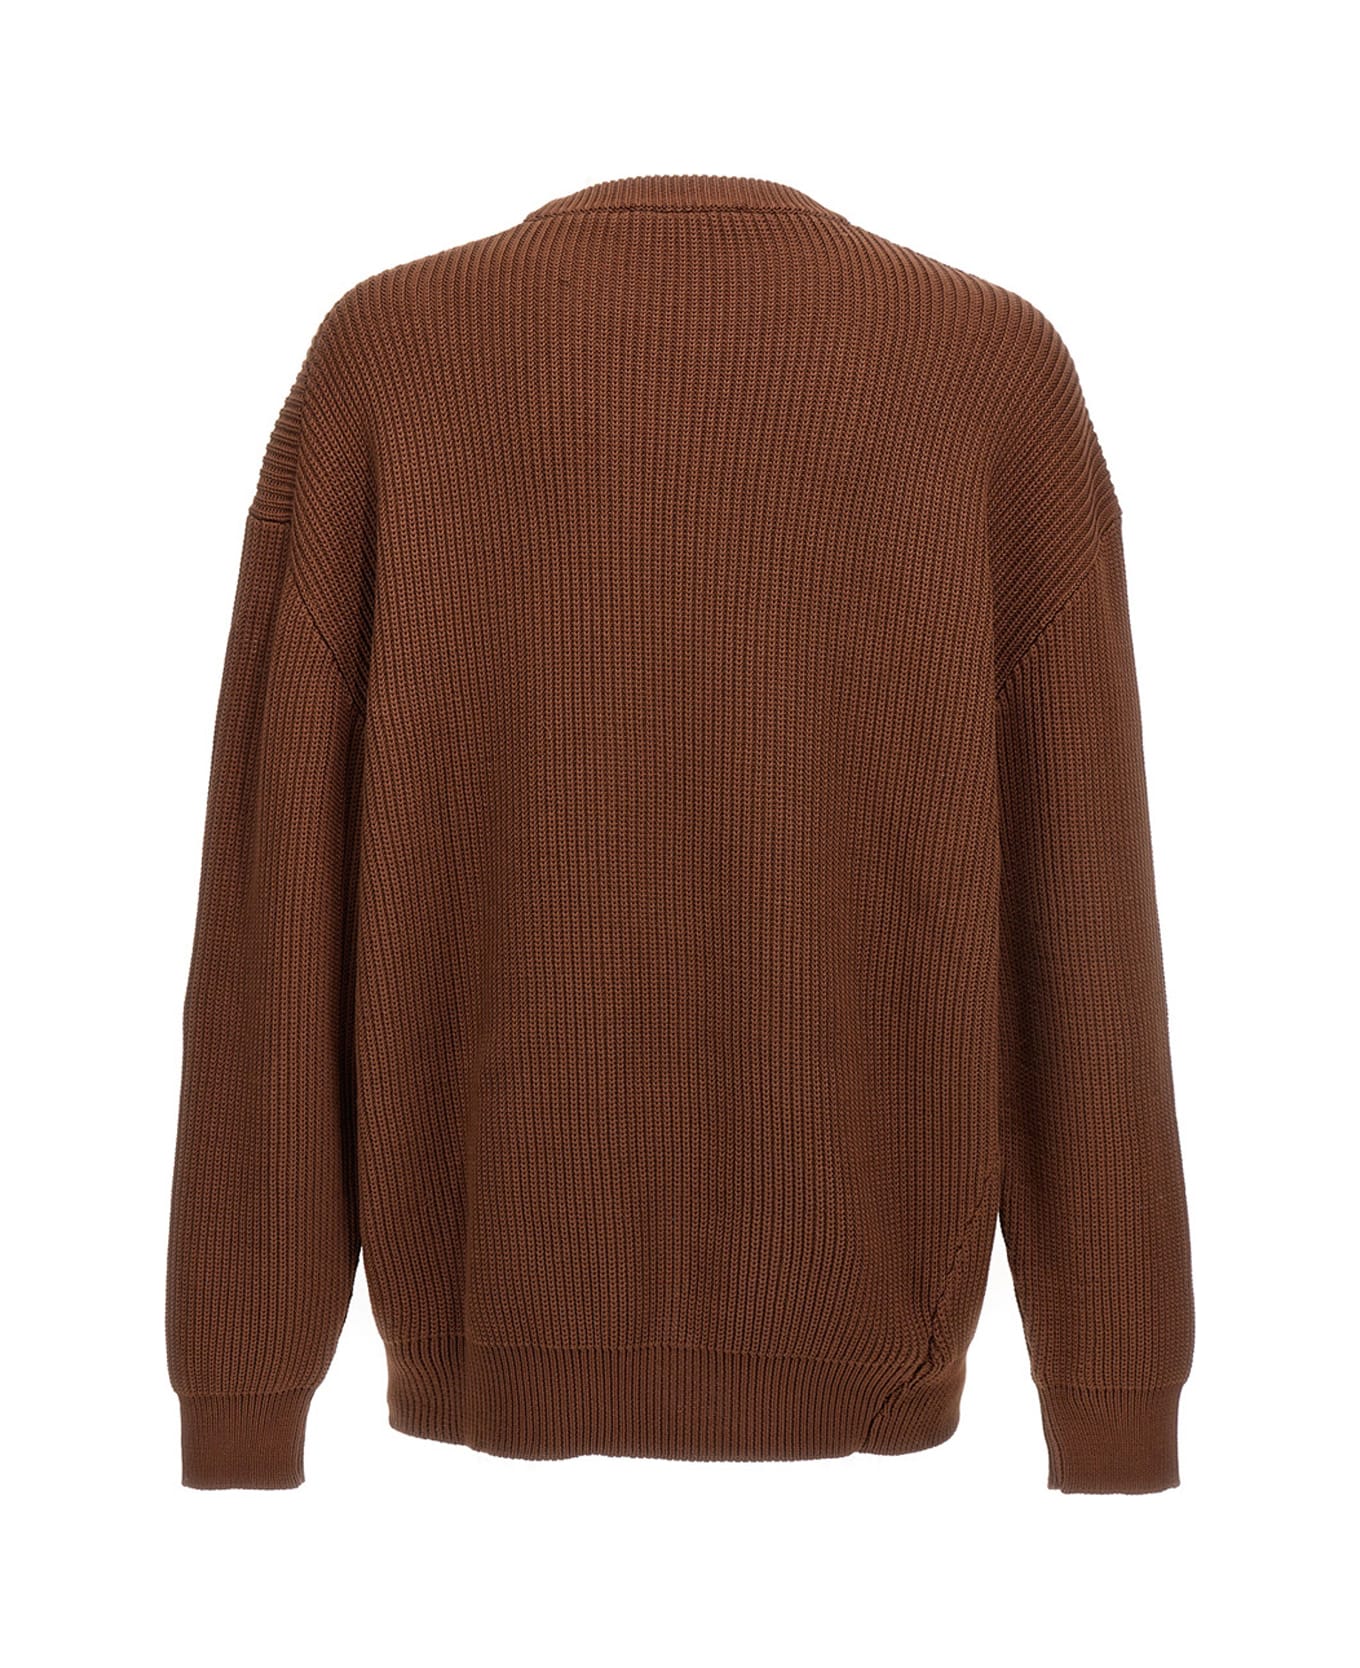 Hed Mayner 'twisted' Sweater - Brown